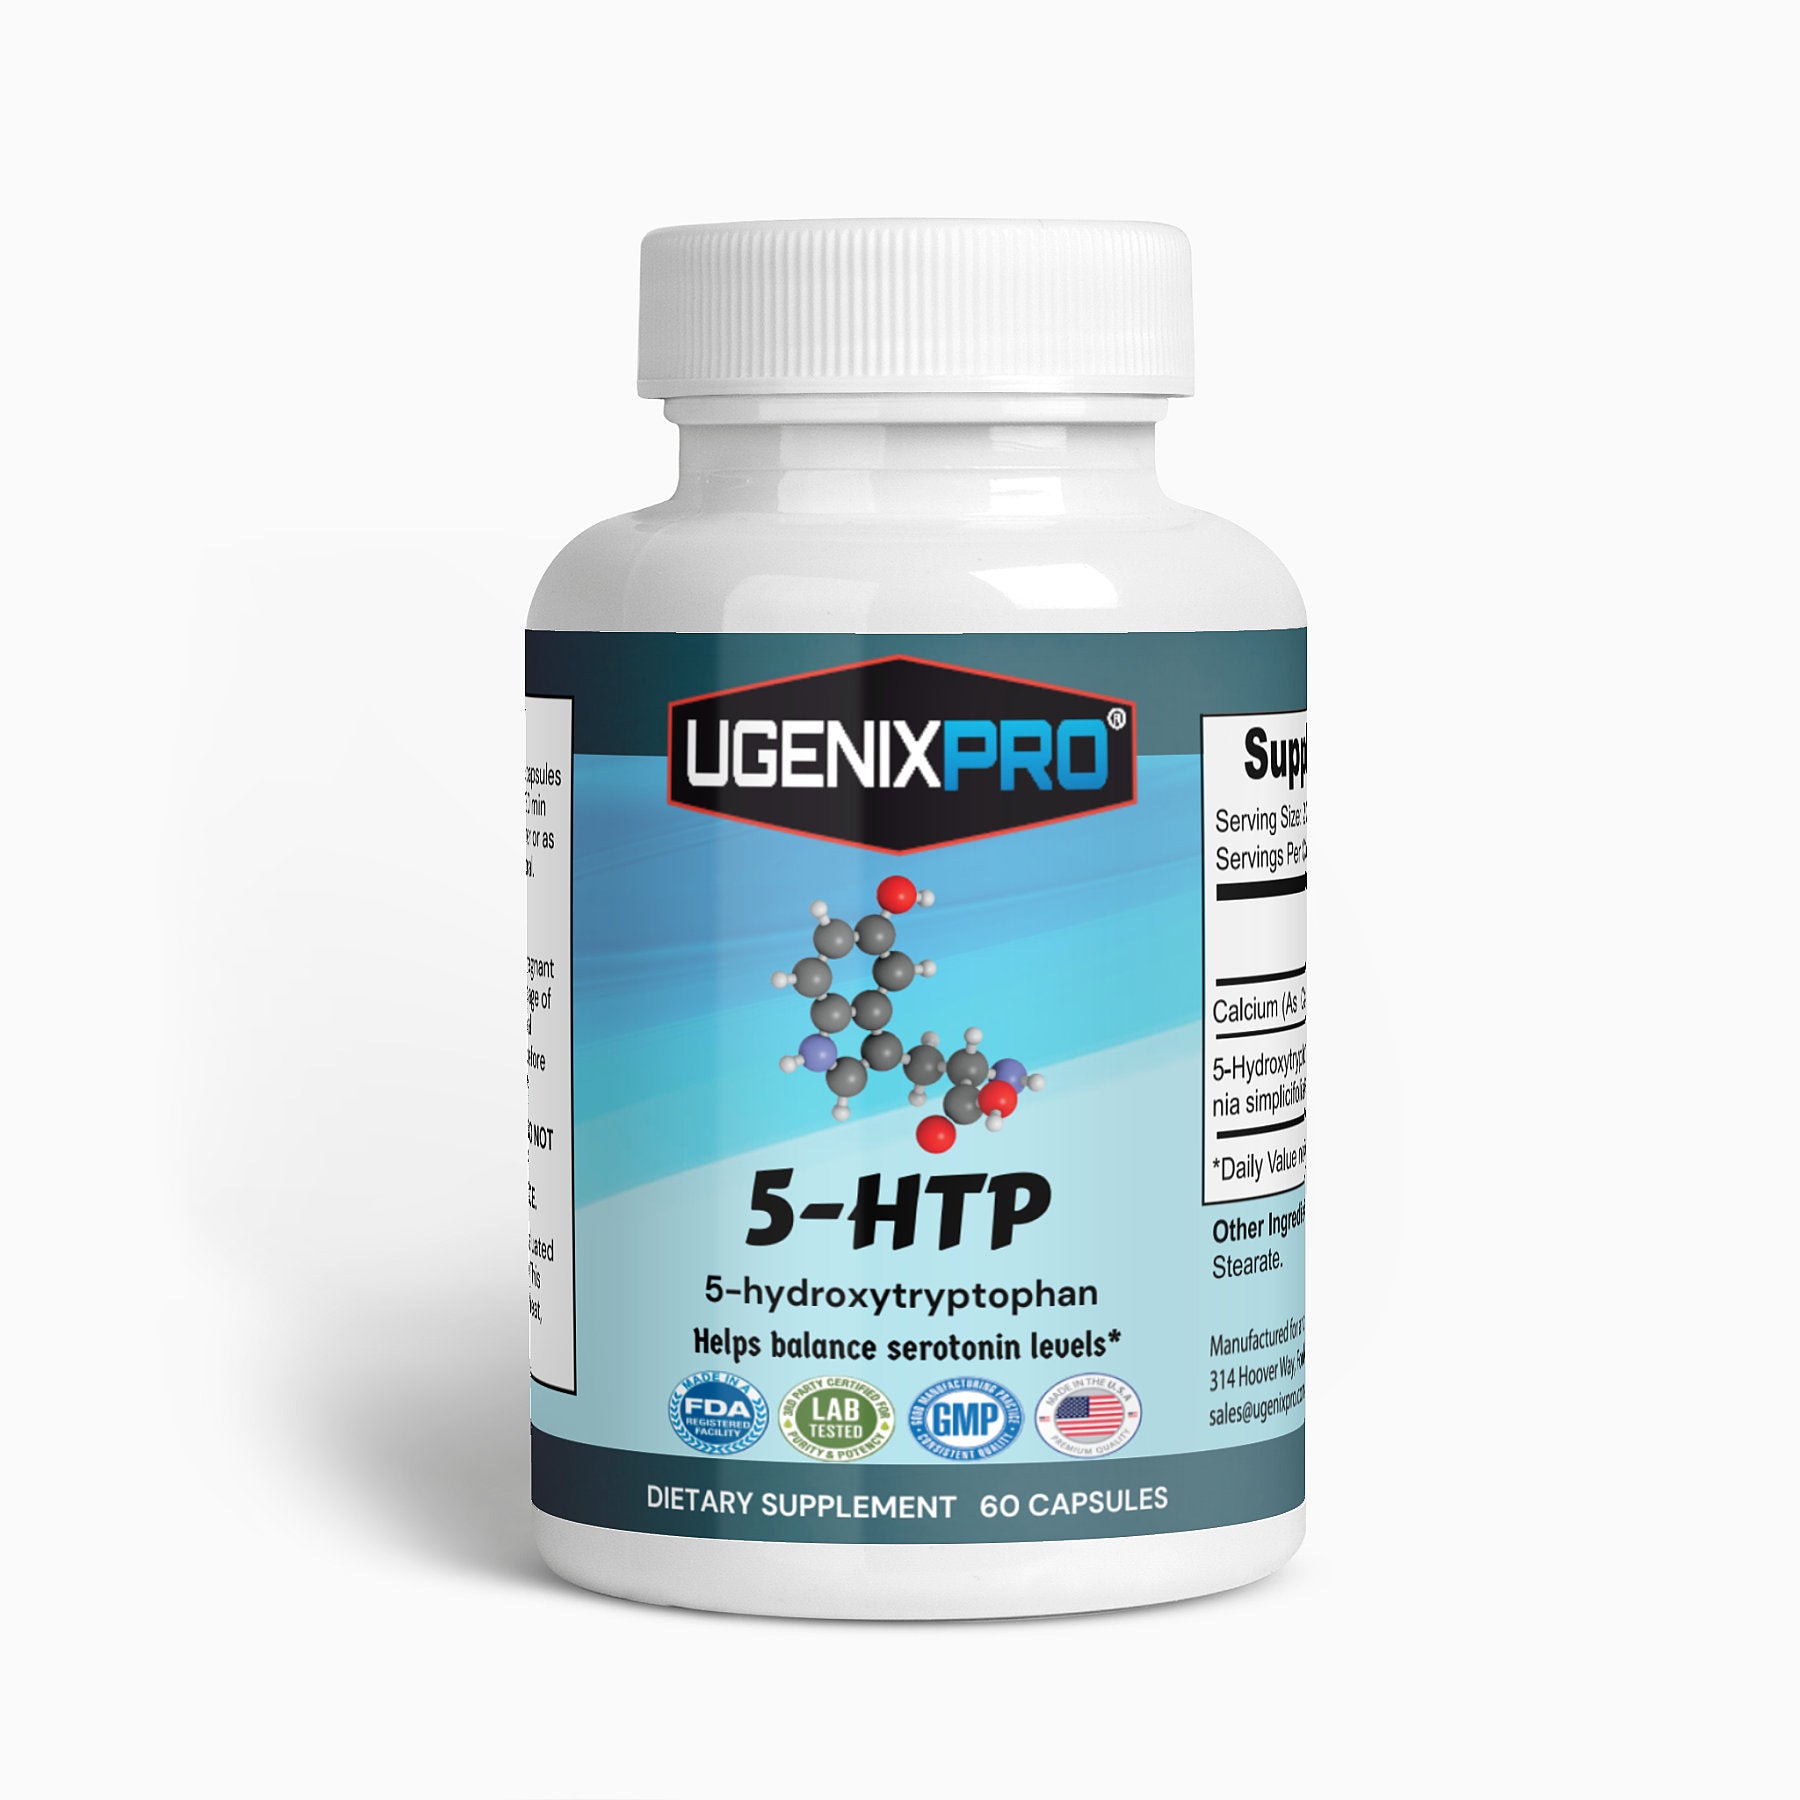 UgenixPRO® 5-HTP 200mg Plus Calcium for Mood, Sleep | Supports Calm and Relaxed Mood | 99% High Purity | 60 Capsules